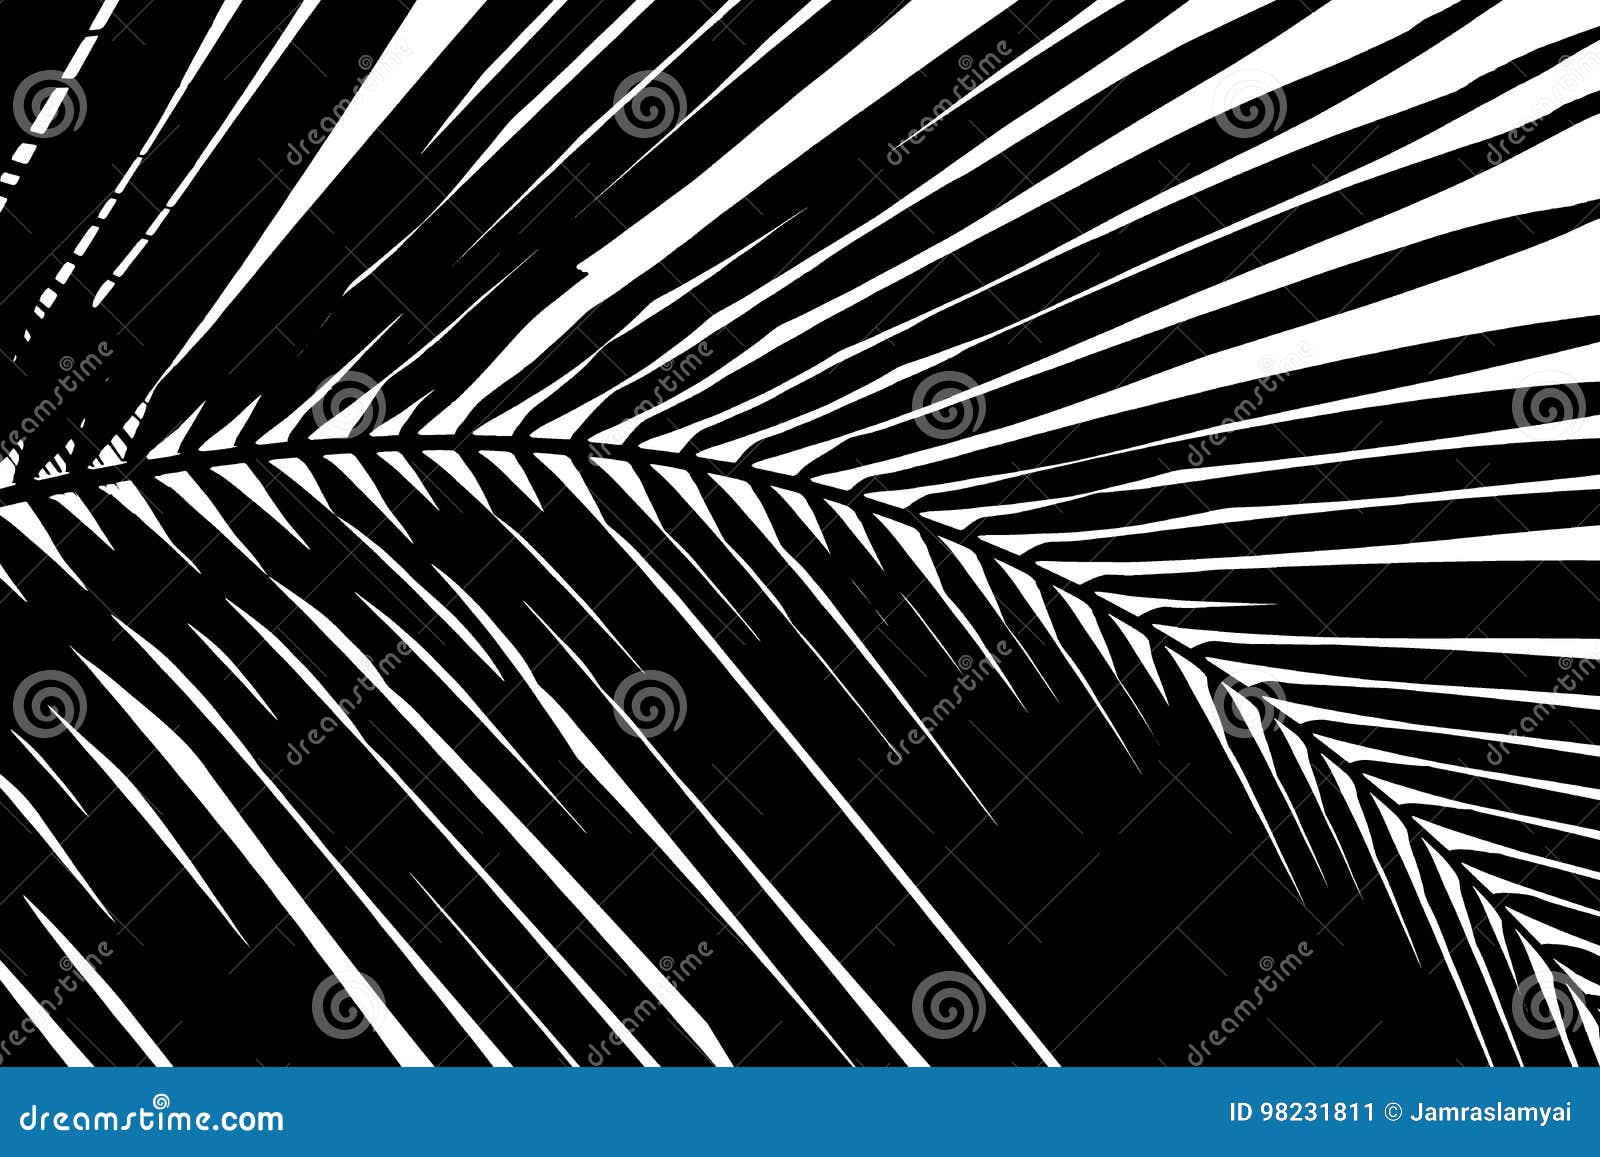 black and white abstract background of palms leaf